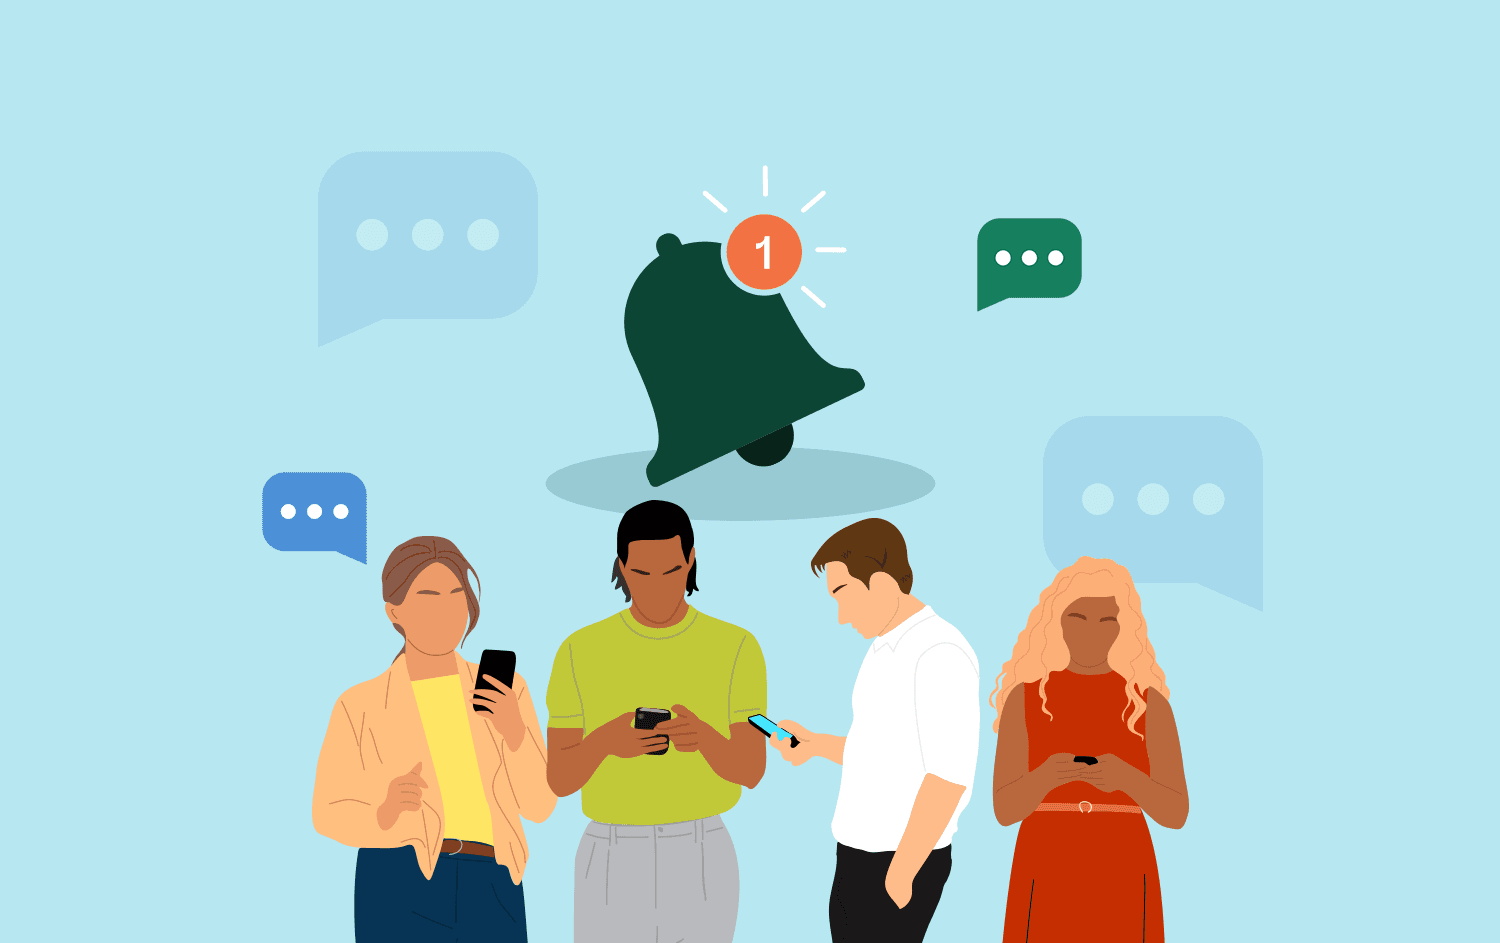 cartoon representation of several people holding smartphones and text message bubbles appear over their heads with an ‘alert’ icon